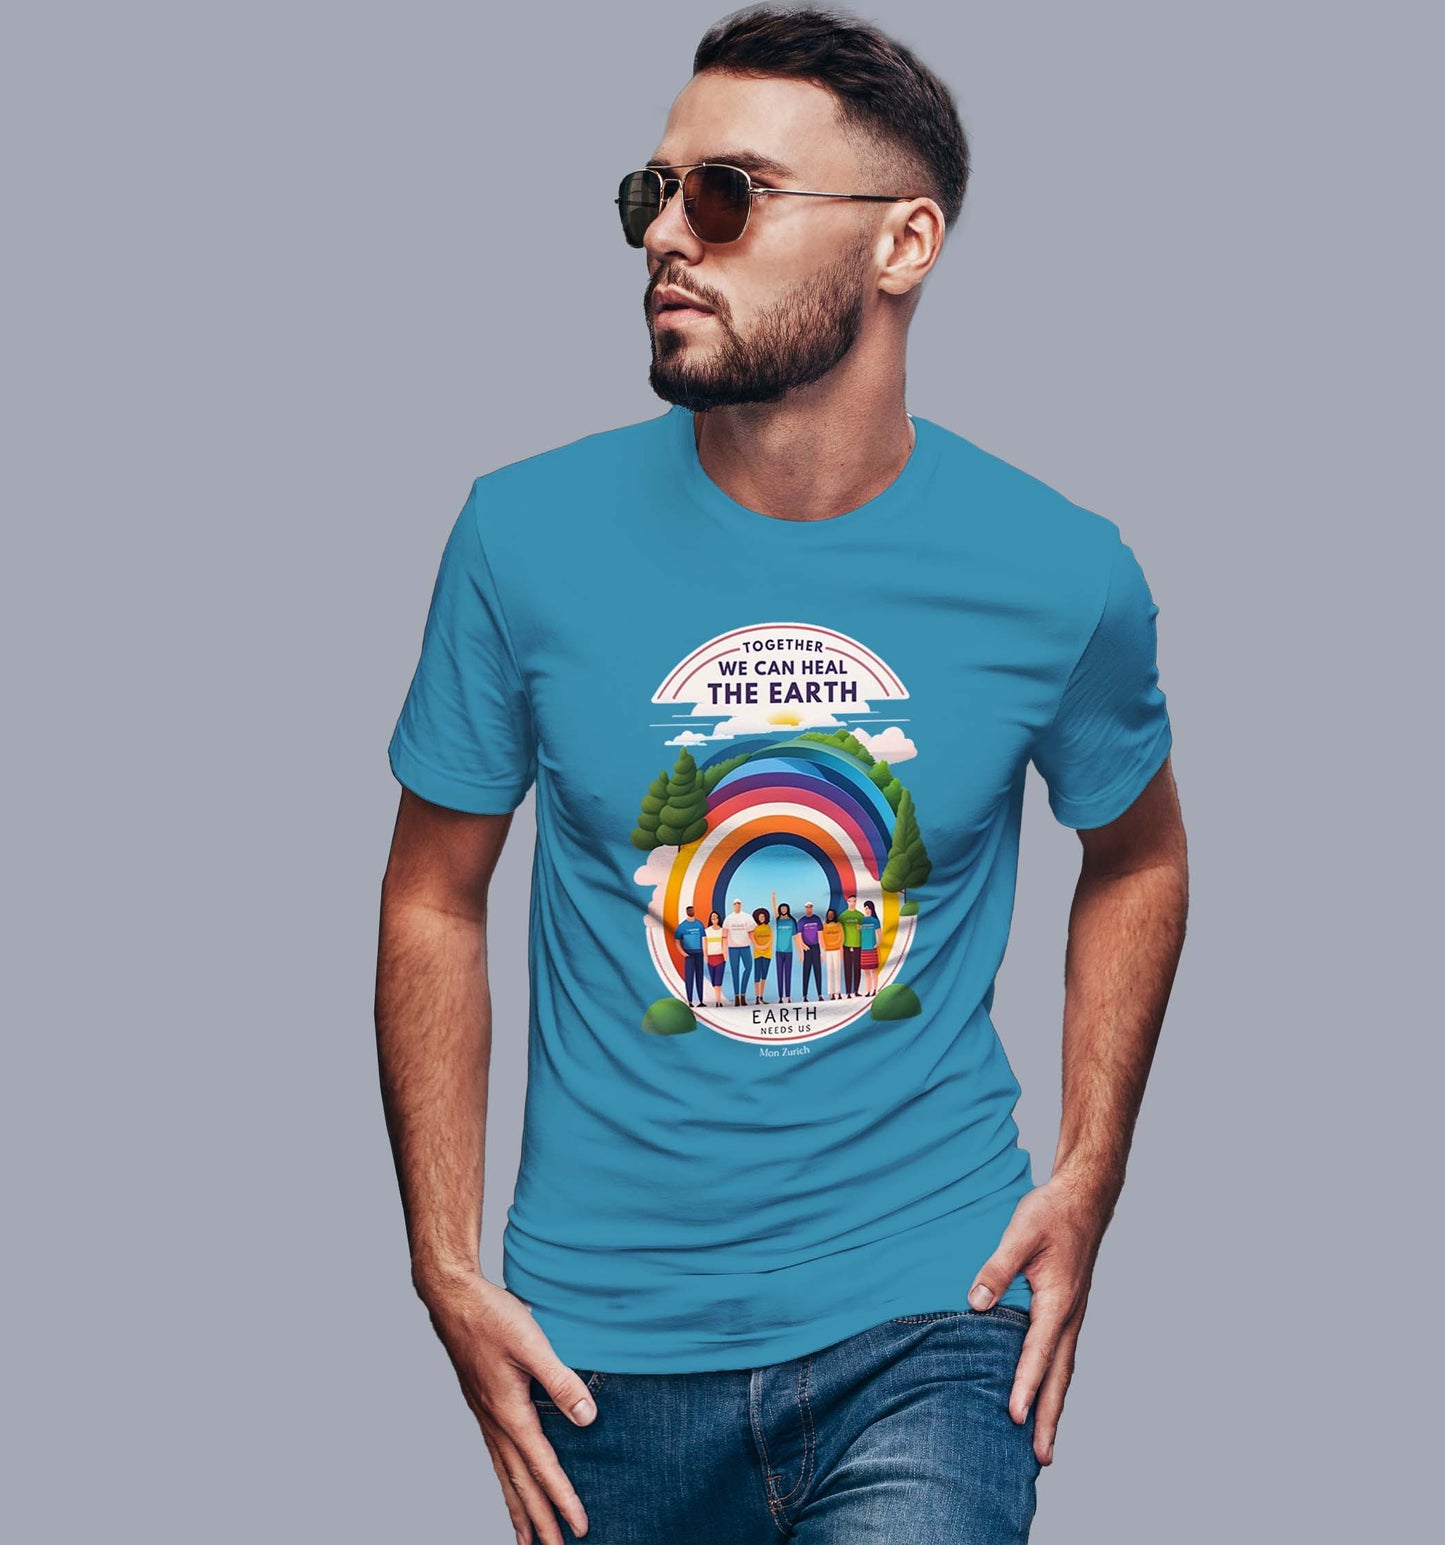 Together We Can Heal the Earth T-shirt in Dark - Mon Zurich Originals